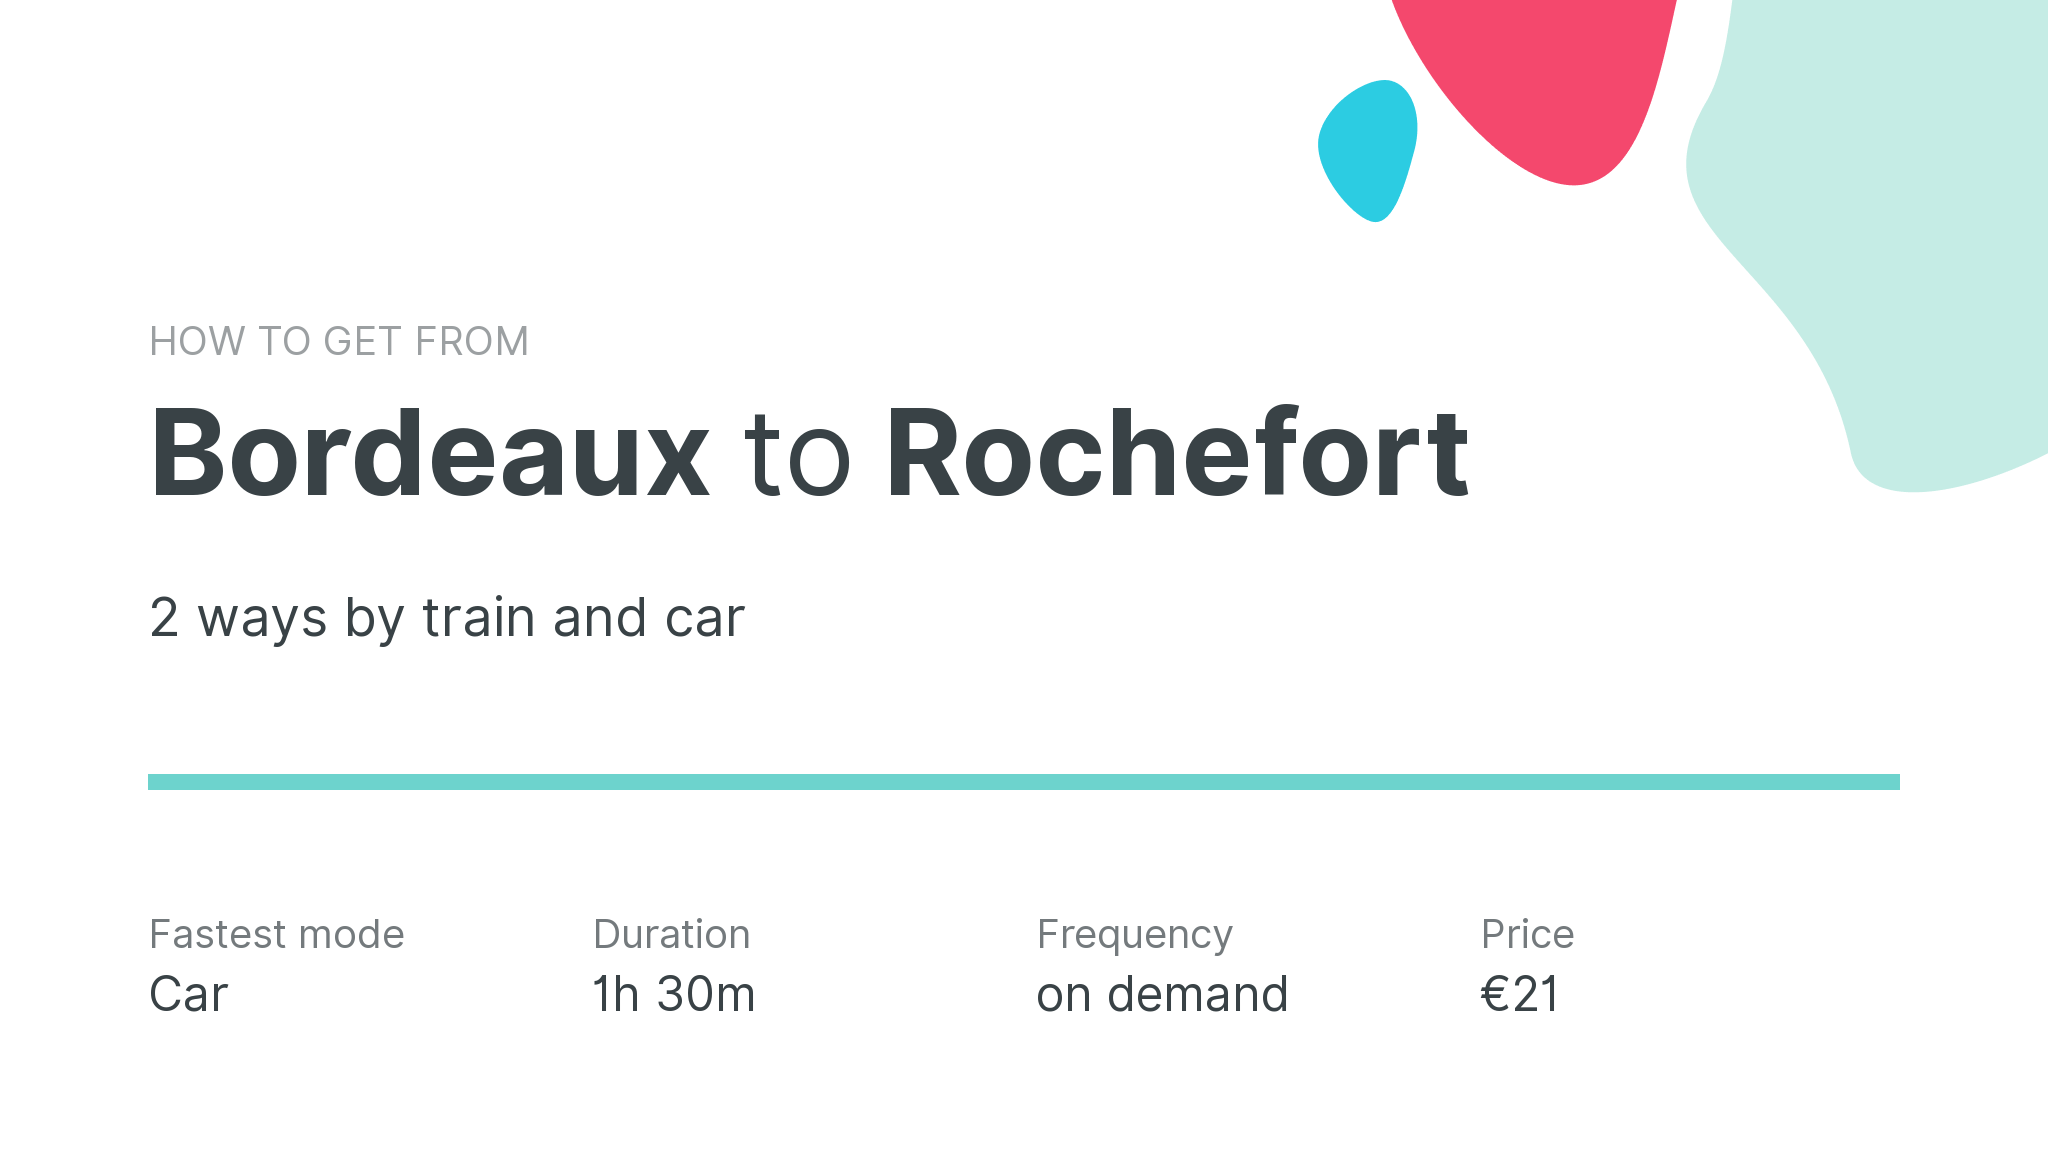 How do I get from Bordeaux to Rochefort